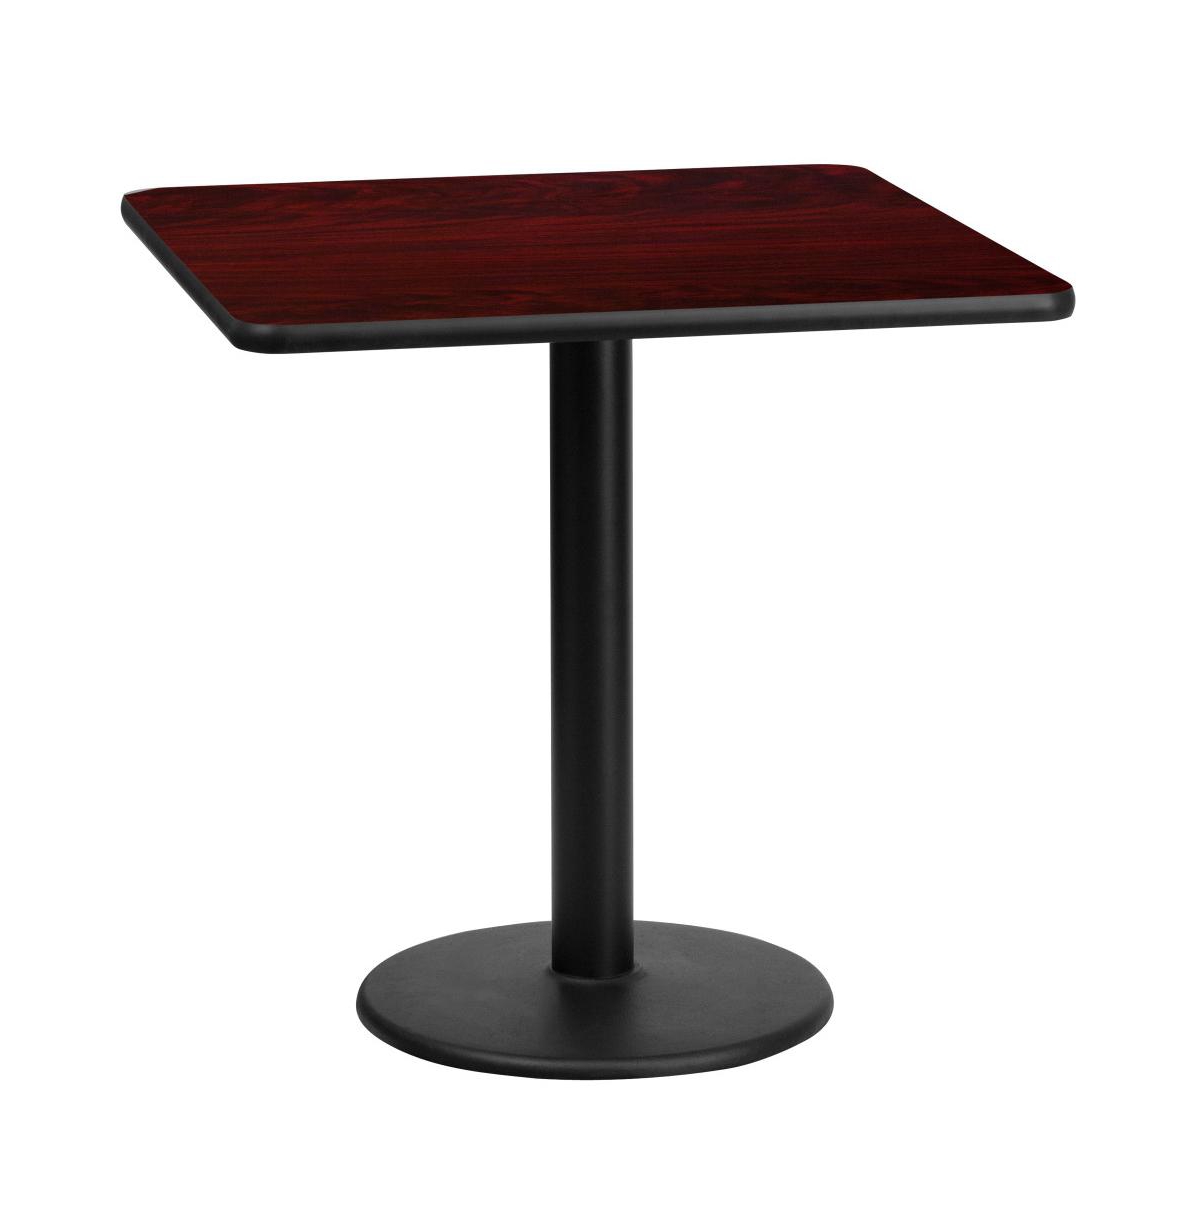 Emma+oliver 24" Square Laminate Table Top With 18" Round Table Height Base In Mahogany